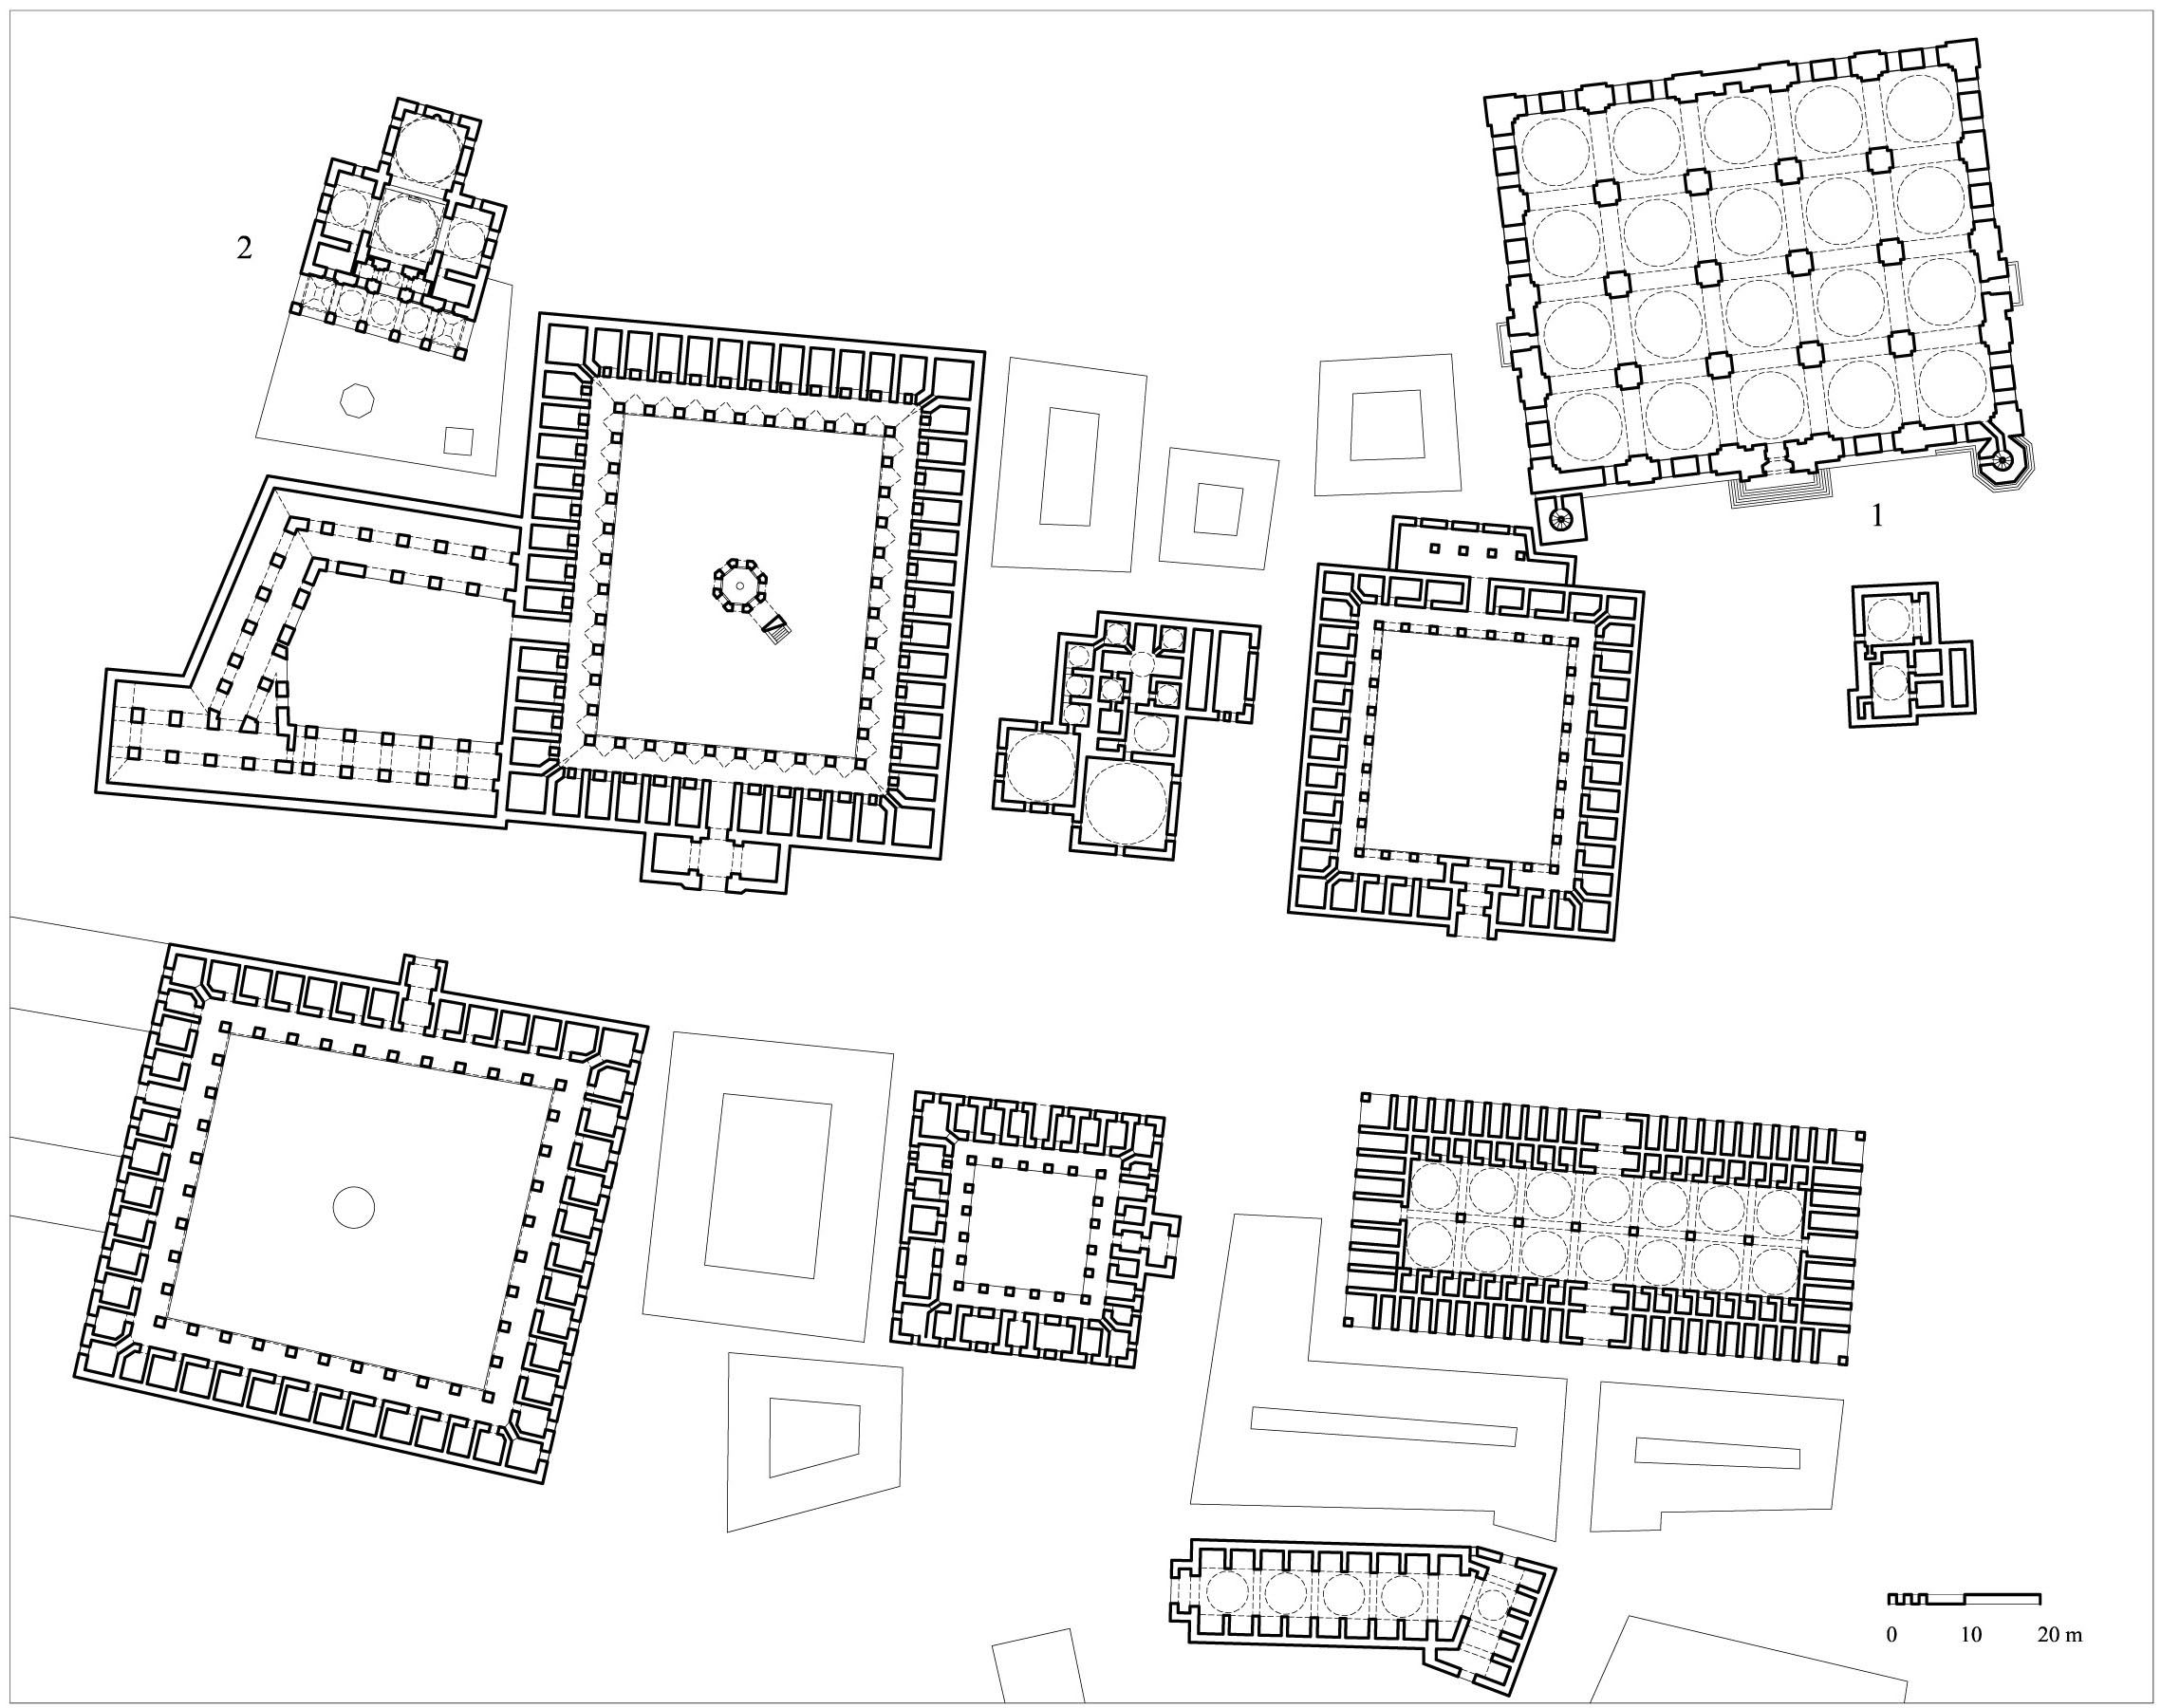 Site plan of marketplace with floor plans of caravanserais and baths, showing (1) Great Mosque of Bayezid I, (2) convent-masjid of Orhan I